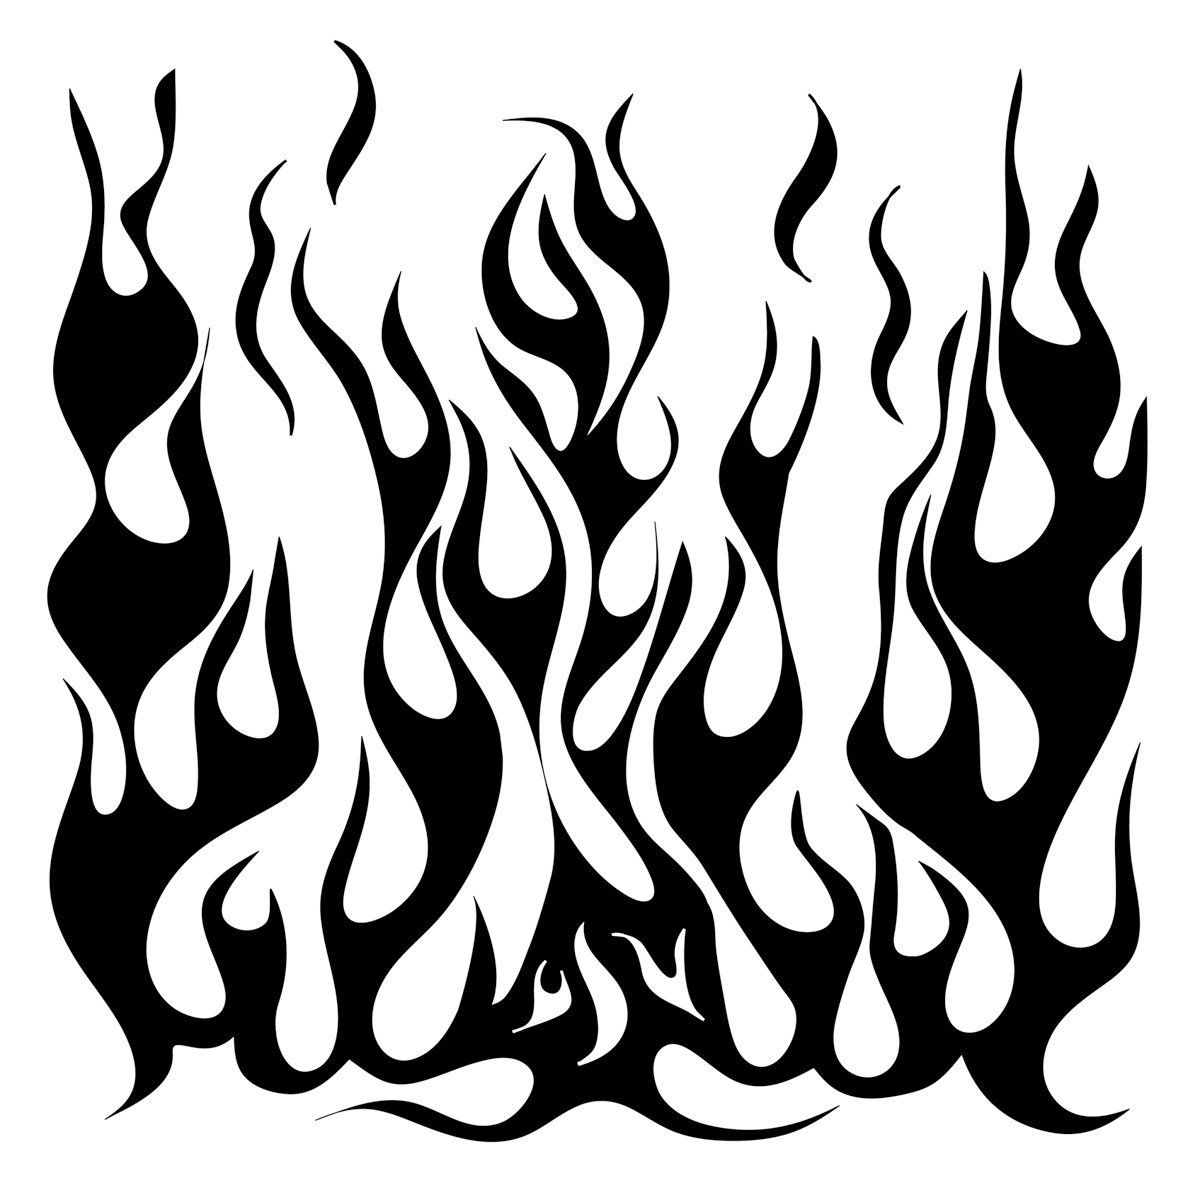 The Crafters Workshop Flames 12 x 12 inch